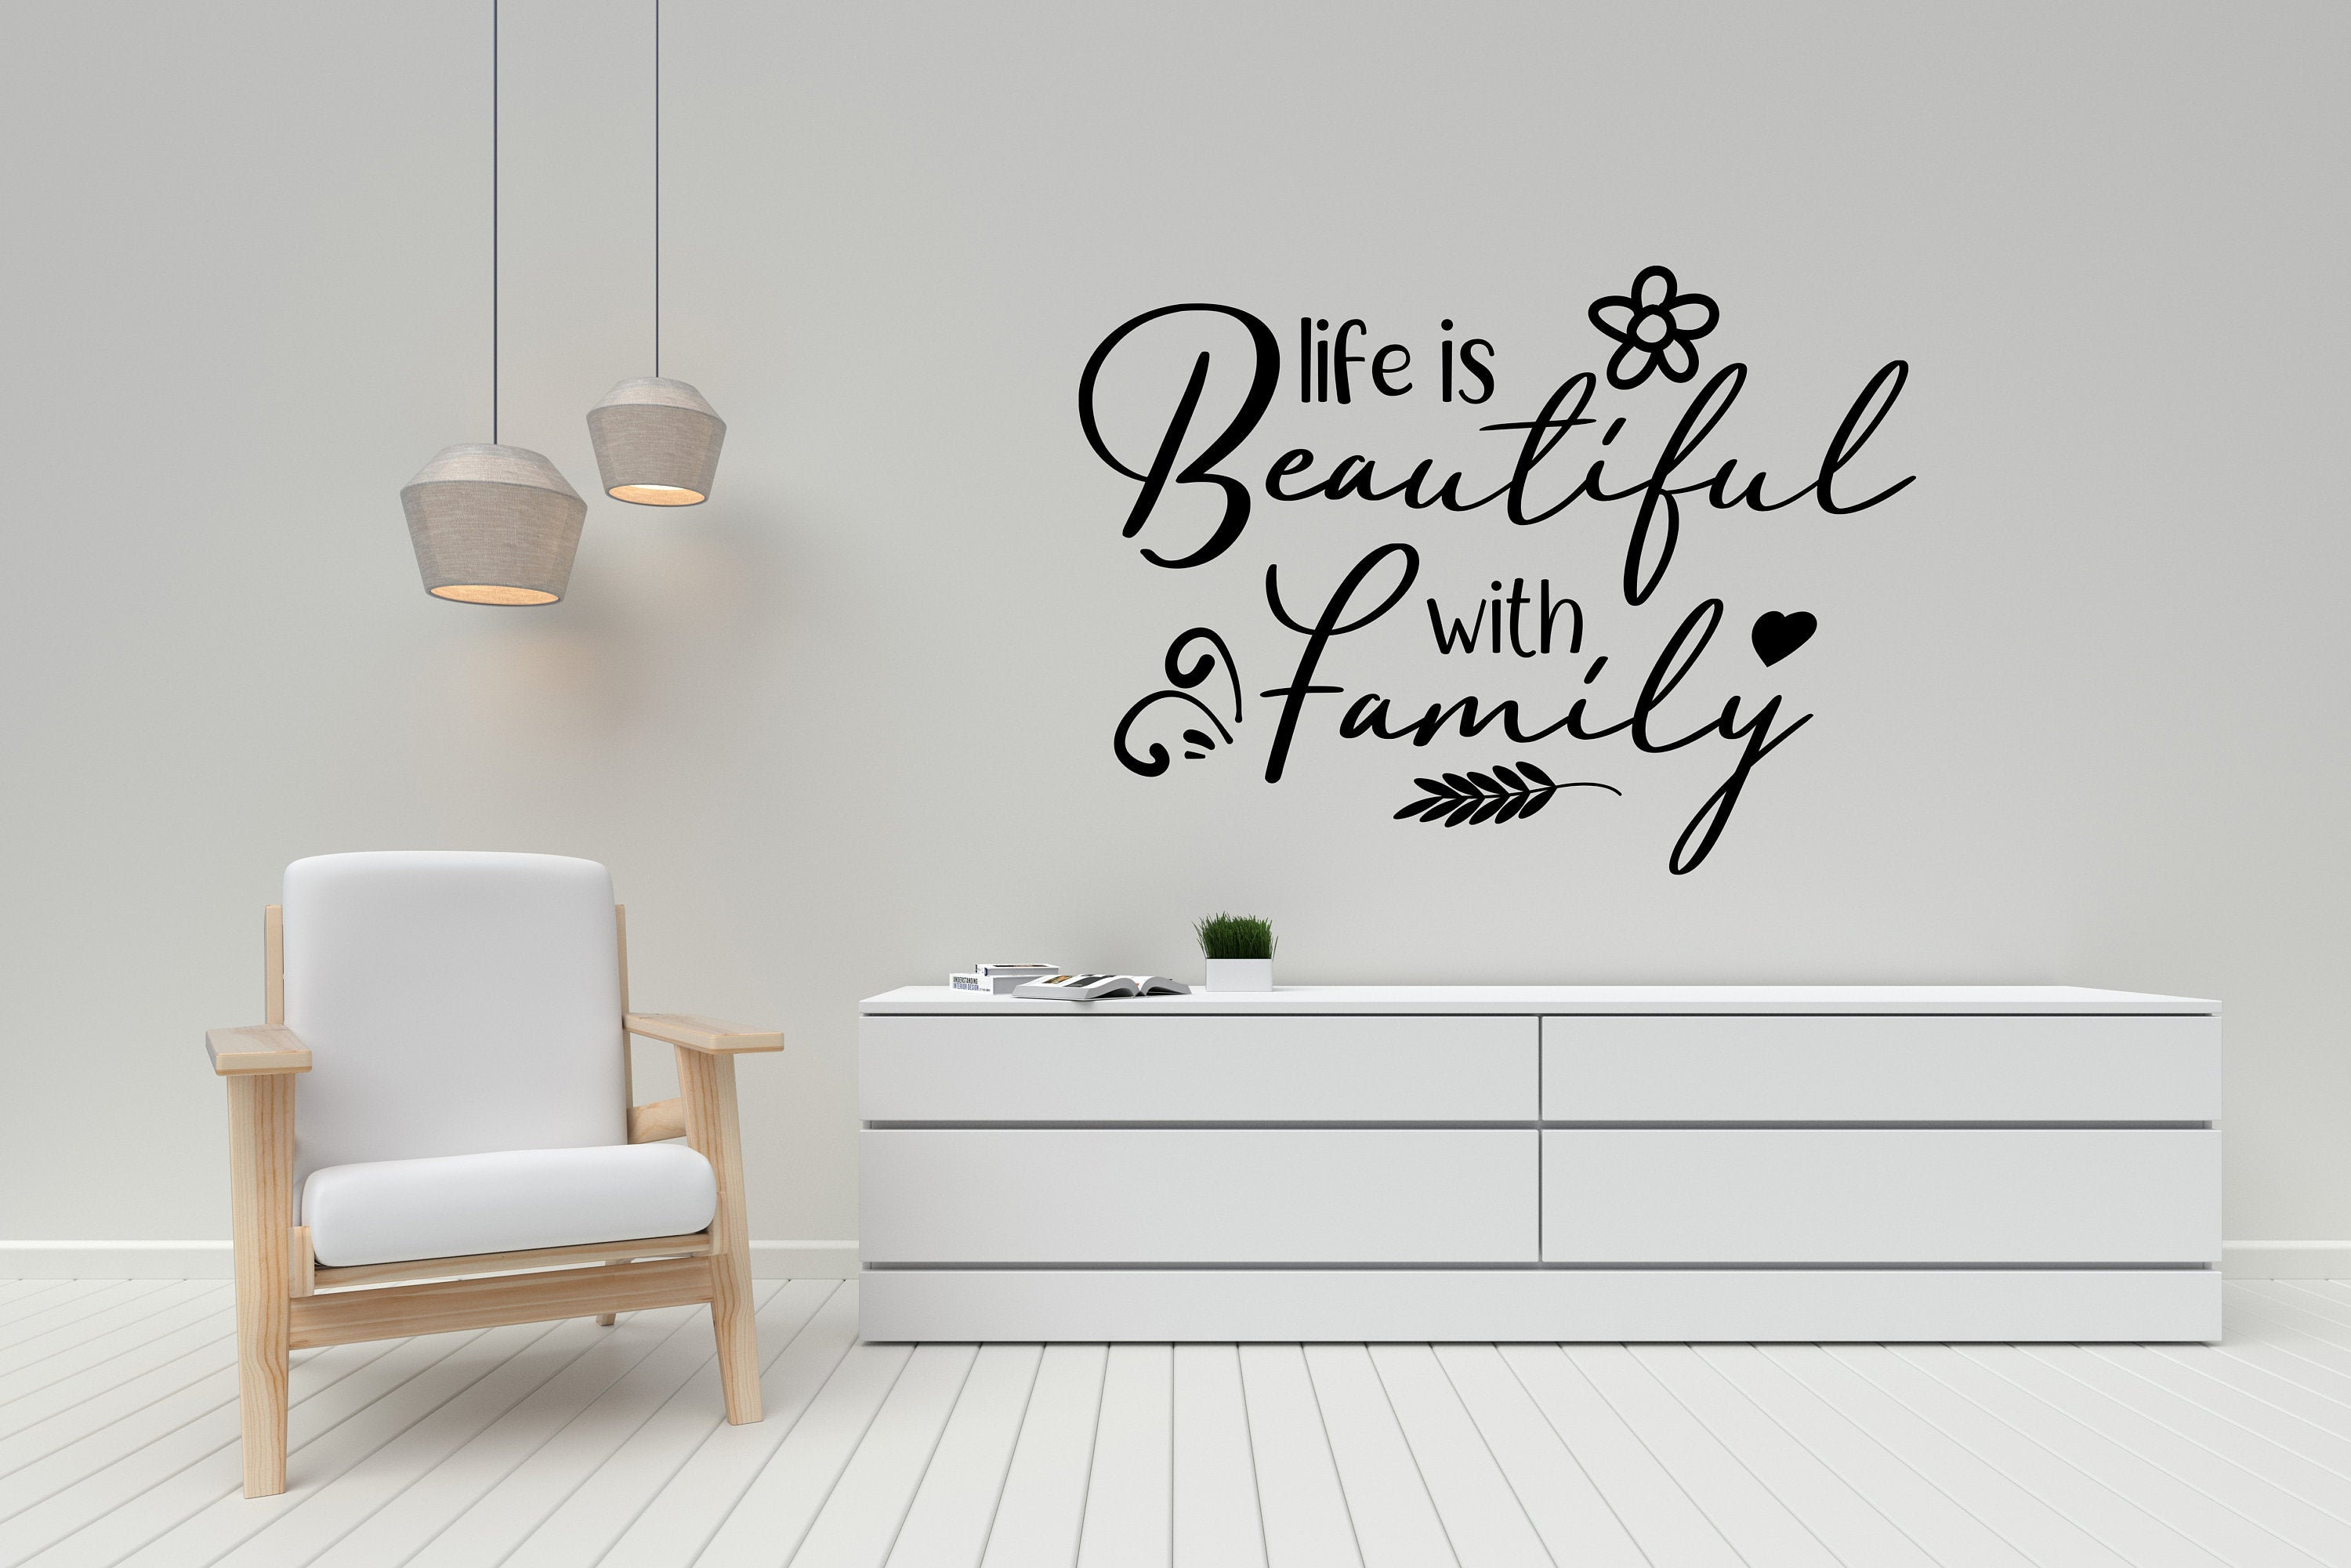 Family Quotes Wall Decalhome Sweet Home Quotes Wall Artvinyl ...